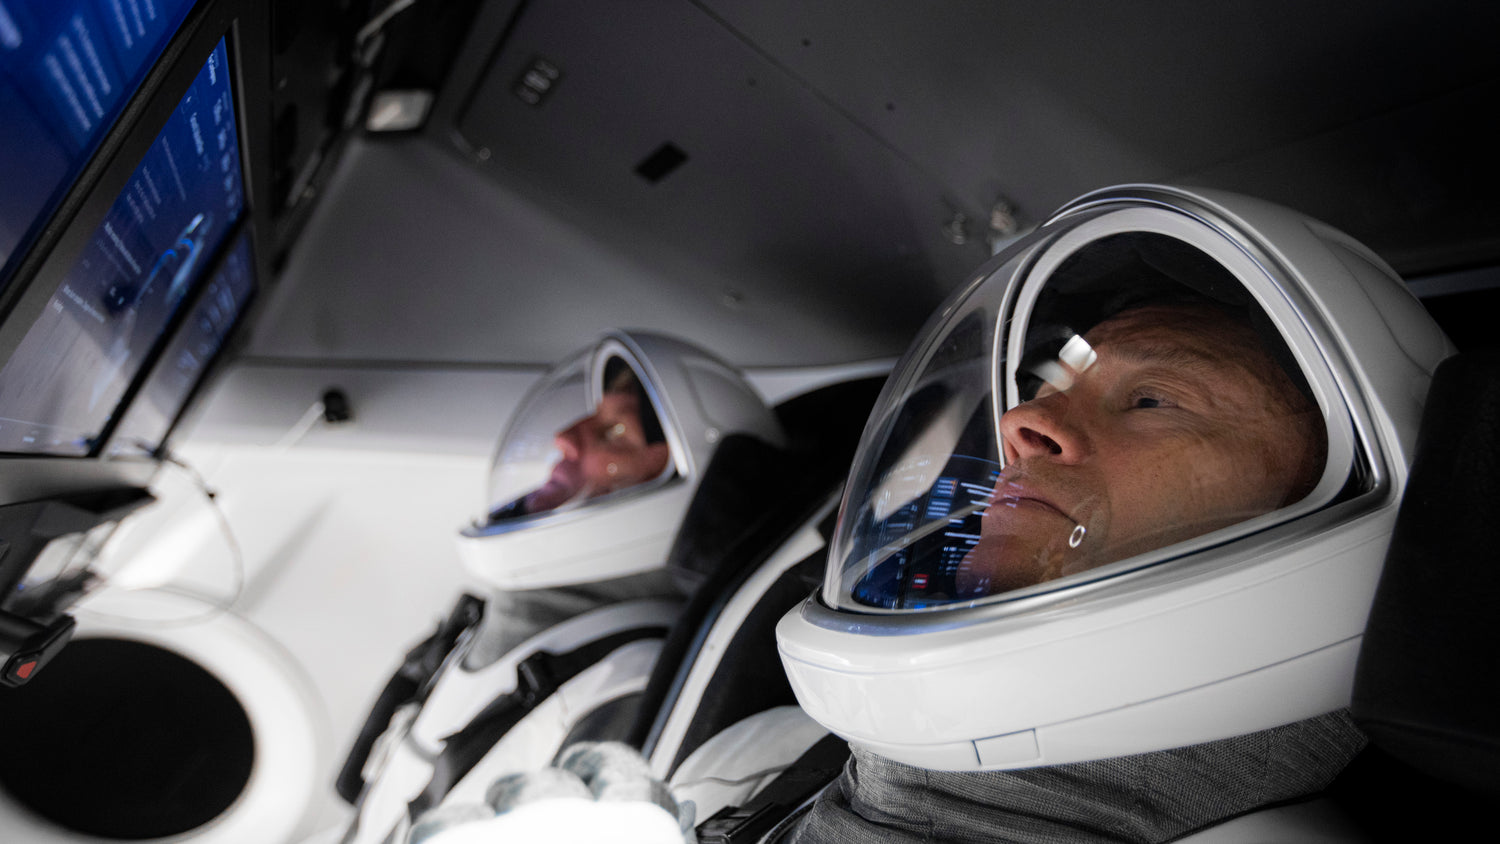 Axiom's First Crew Set To Visit The Space Station Is Training To Ride SpaceX's Crew Dragon